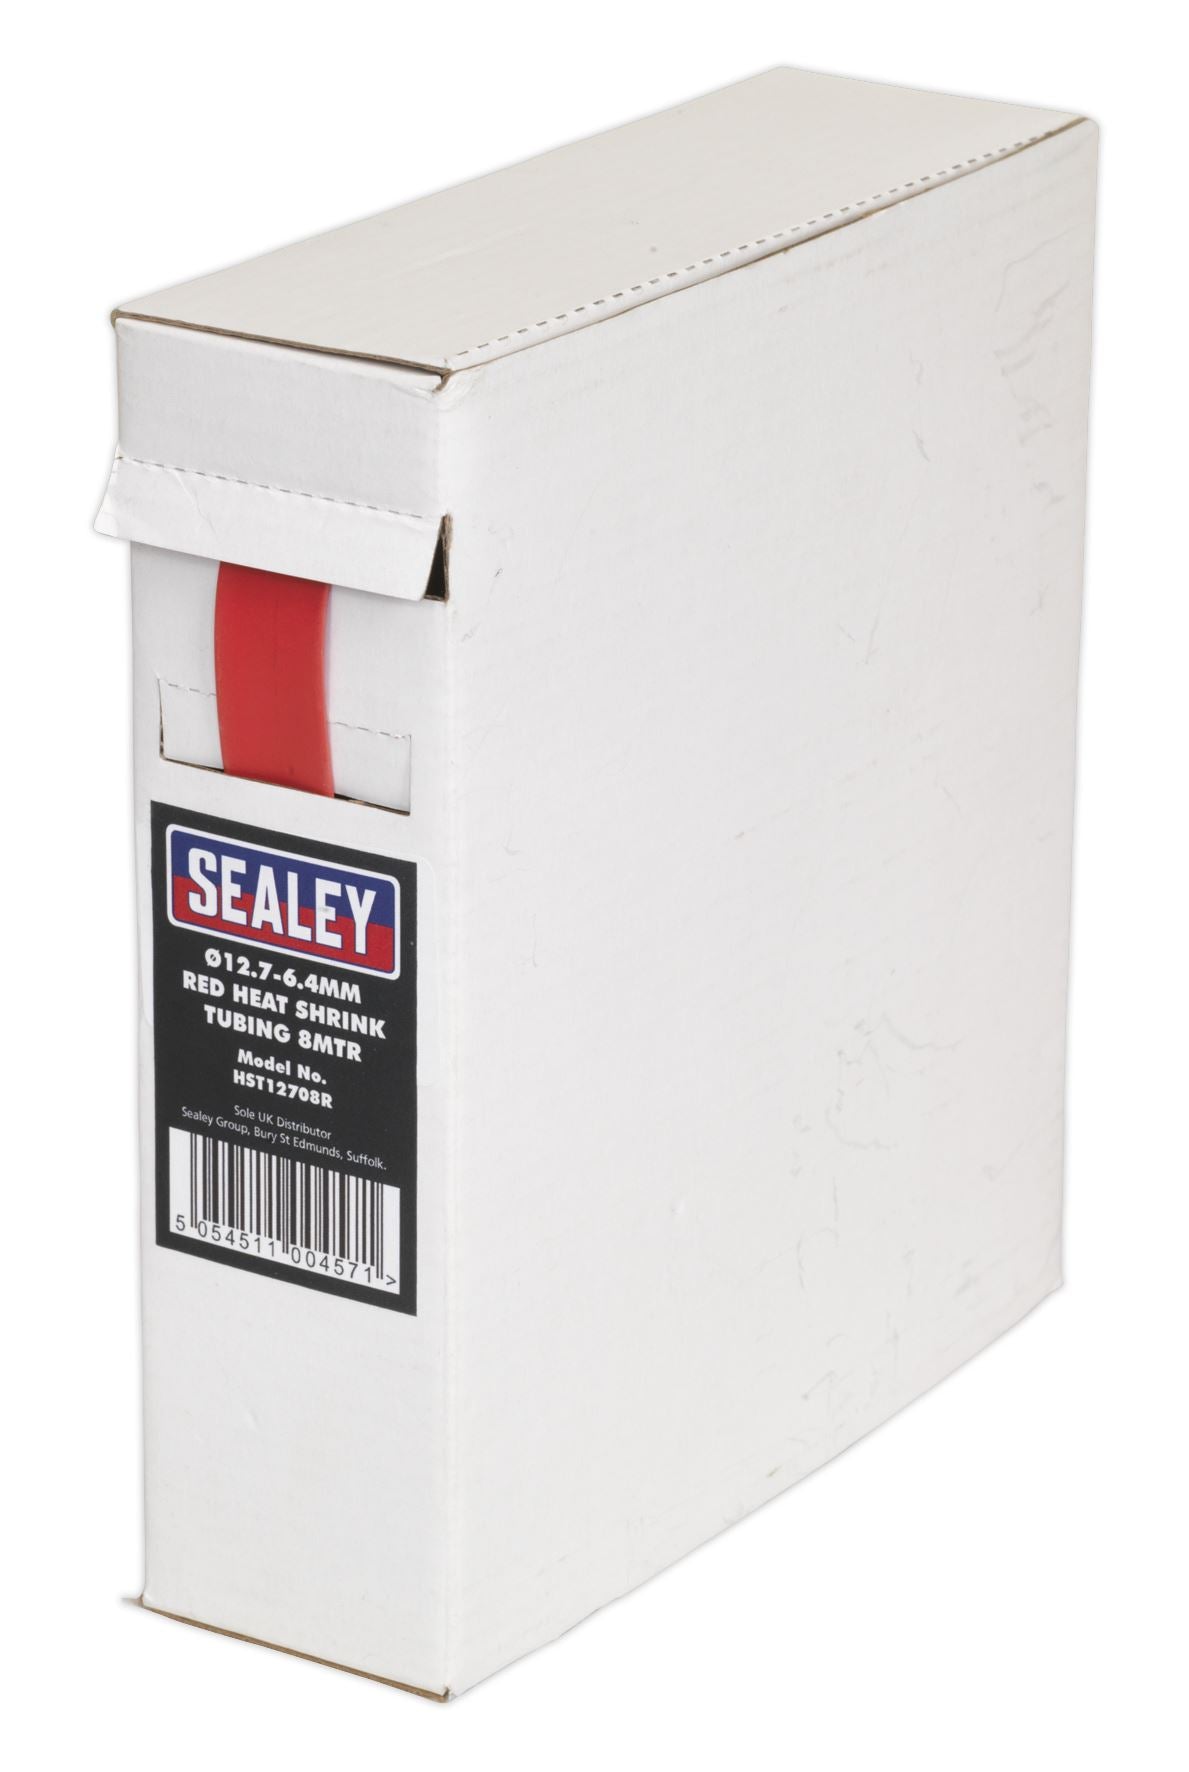 Sealey Black and Red Heat Shrink Tubing on a Roll